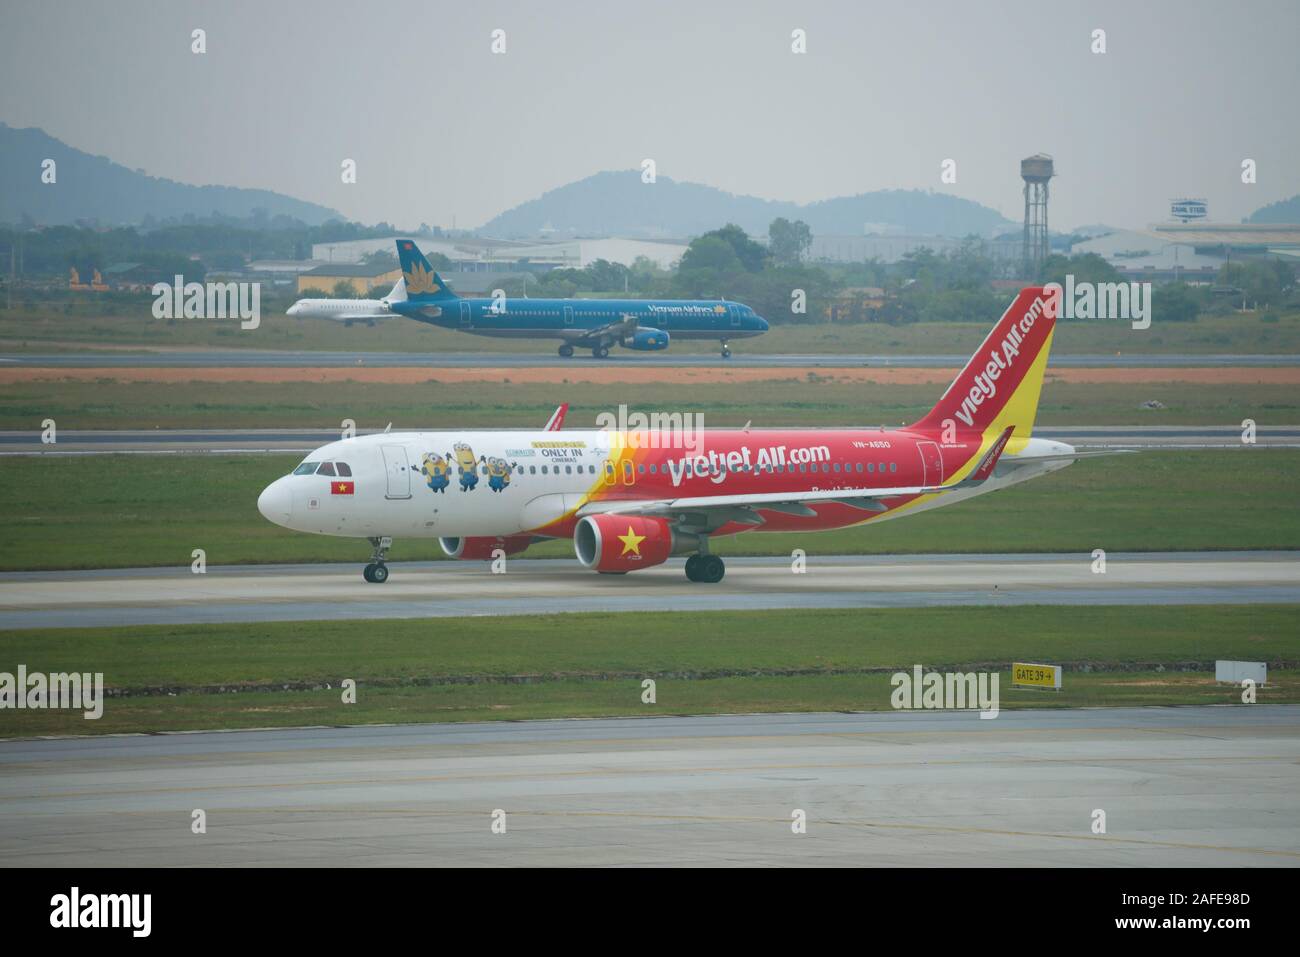 HANOI, VIETNAM - JANUARY 12, 2016: Airbus A320-200 (VN-A650) VietJetAir airline on the taxiway of Noi Bai Airport Stock Photo